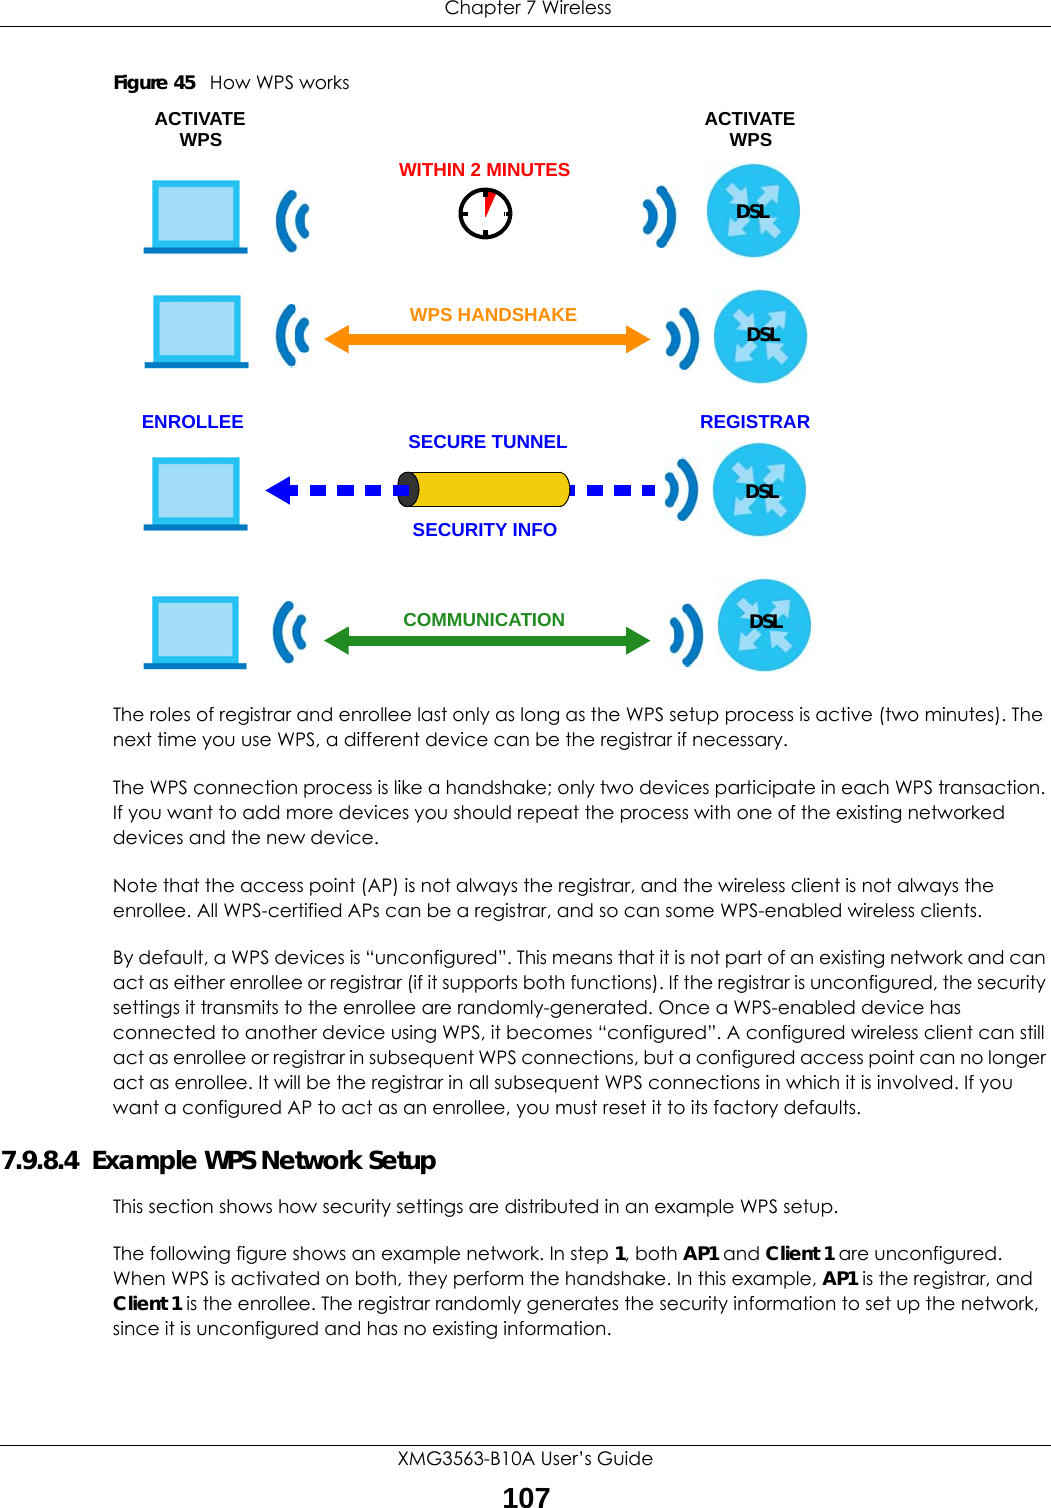  Chapter 7 WirelessXMG3563-B10A User’s Guide107Figure 45   How WPS worksThe roles of registrar and enrollee last only as long as the WPS setup process is active (two minutes). The next time you use WPS, a different device can be the registrar if necessary.The WPS connection process is like a handshake; only two devices participate in each WPS transaction. If you want to add more devices you should repeat the process with one of the existing networked devices and the new device.Note that the access point (AP) is not always the registrar, and the wireless client is not always the enrollee. All WPS-certified APs can be a registrar, and so can some WPS-enabled wireless clients.By default, a WPS devices is “unconfigured”. This means that it is not part of an existing network and can act as either enrollee or registrar (if it supports both functions). If the registrar is unconfigured, the security settings it transmits to the enrollee are randomly-generated. Once a WPS-enabled device has connected to another device using WPS, it becomes “configured”. A configured wireless client can still act as enrollee or registrar in subsequent WPS connections, but a configured access point can no longer act as enrollee. It will be the registrar in all subsequent WPS connections in which it is involved. If you want a configured AP to act as an enrollee, you must reset it to its factory defaults.7.9.8.4  Example WPS Network SetupThis section shows how security settings are distributed in an example WPS setup.The following figure shows an example network. In step 1, both AP1 and Client 1 are unconfigured. When WPS is activated on both, they perform the handshake. In this example, AP1 is the registrar, and Client 1 is the enrollee. The registrar randomly generates the security information to set up the network, since it is unconfigured and has no existing information.SECURE TUNNELSECURITY INFOWITHIN 2 MINUTESCOMMUNICATIONACTIVATEWPSACTIVATEWPSWPS HANDSHAKEREGISTRARENROLLEEDSLDSLDSLDSL